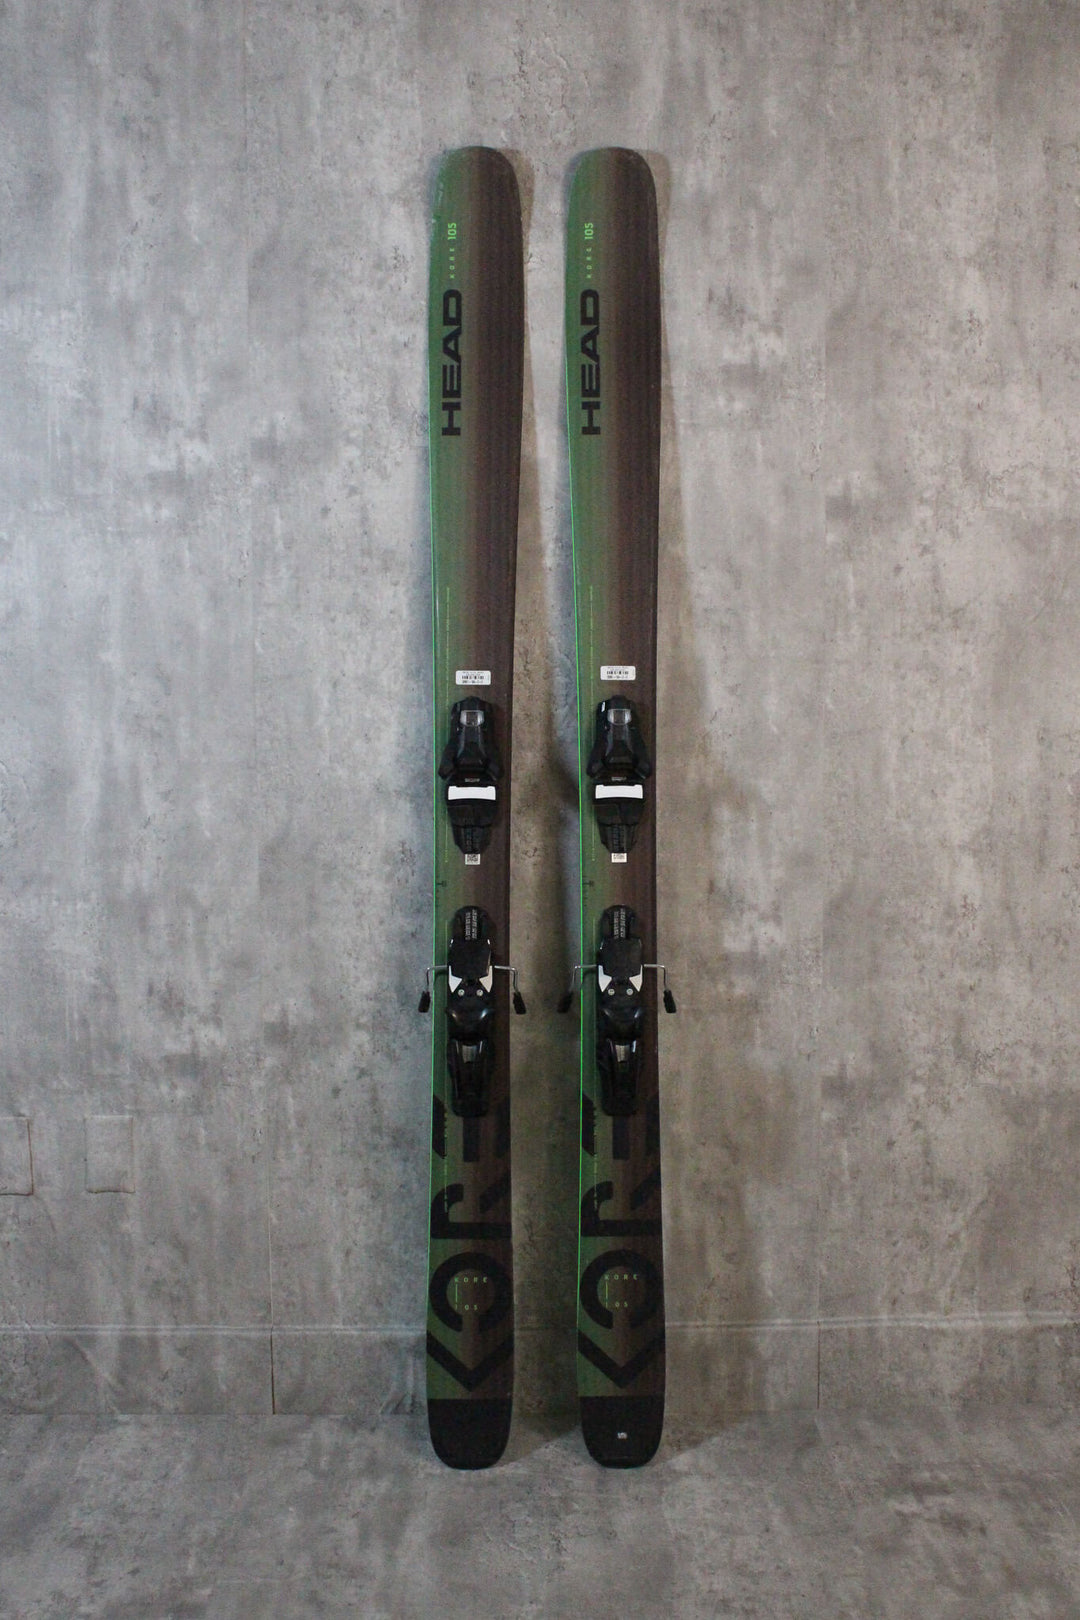 The Head Kore 105 Skis offer downhill performance and backcountry versatility with Multilayer-Carbon Sandwich Cap Construction for feedback and stiffness. Lightweight and reliable, they excel in all conditions. Available as used demo skis online or at Switchback Sports in Park City.